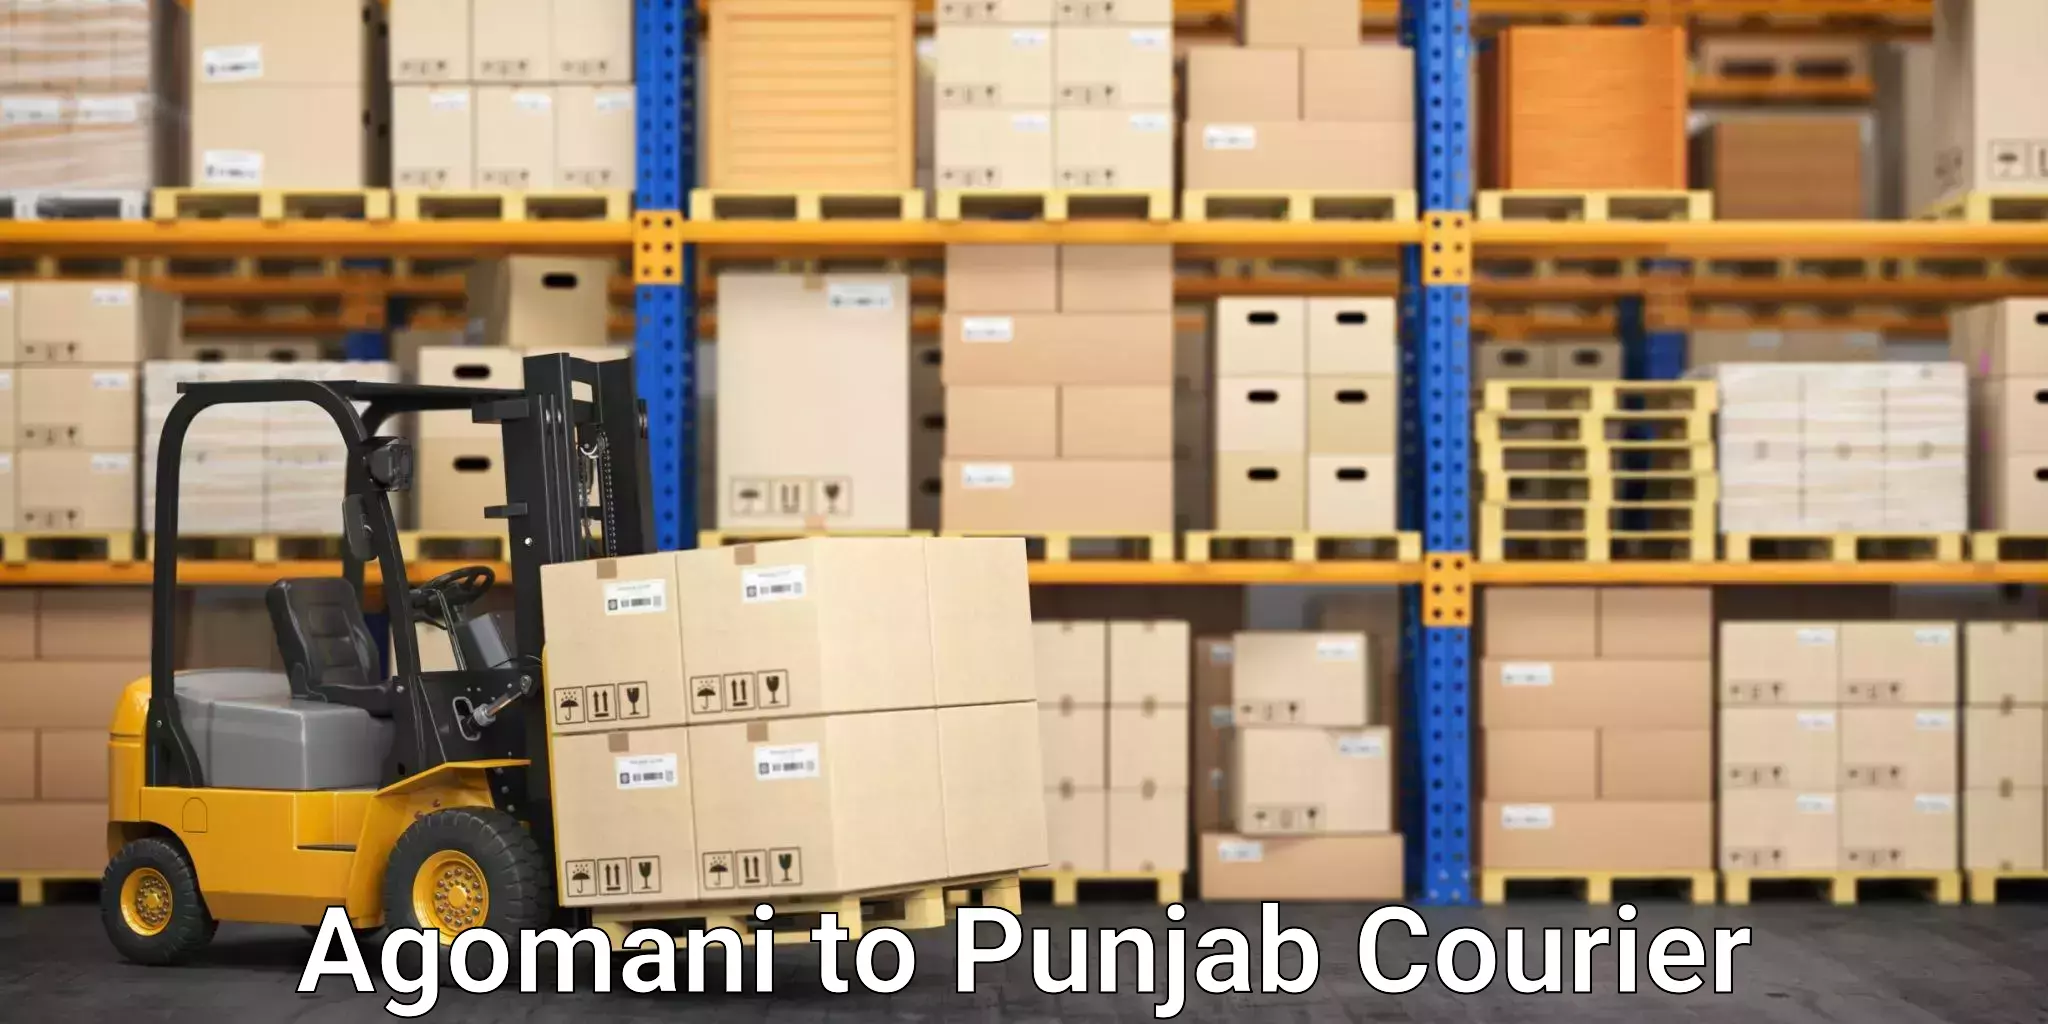 Express delivery network Agomani to Punjab